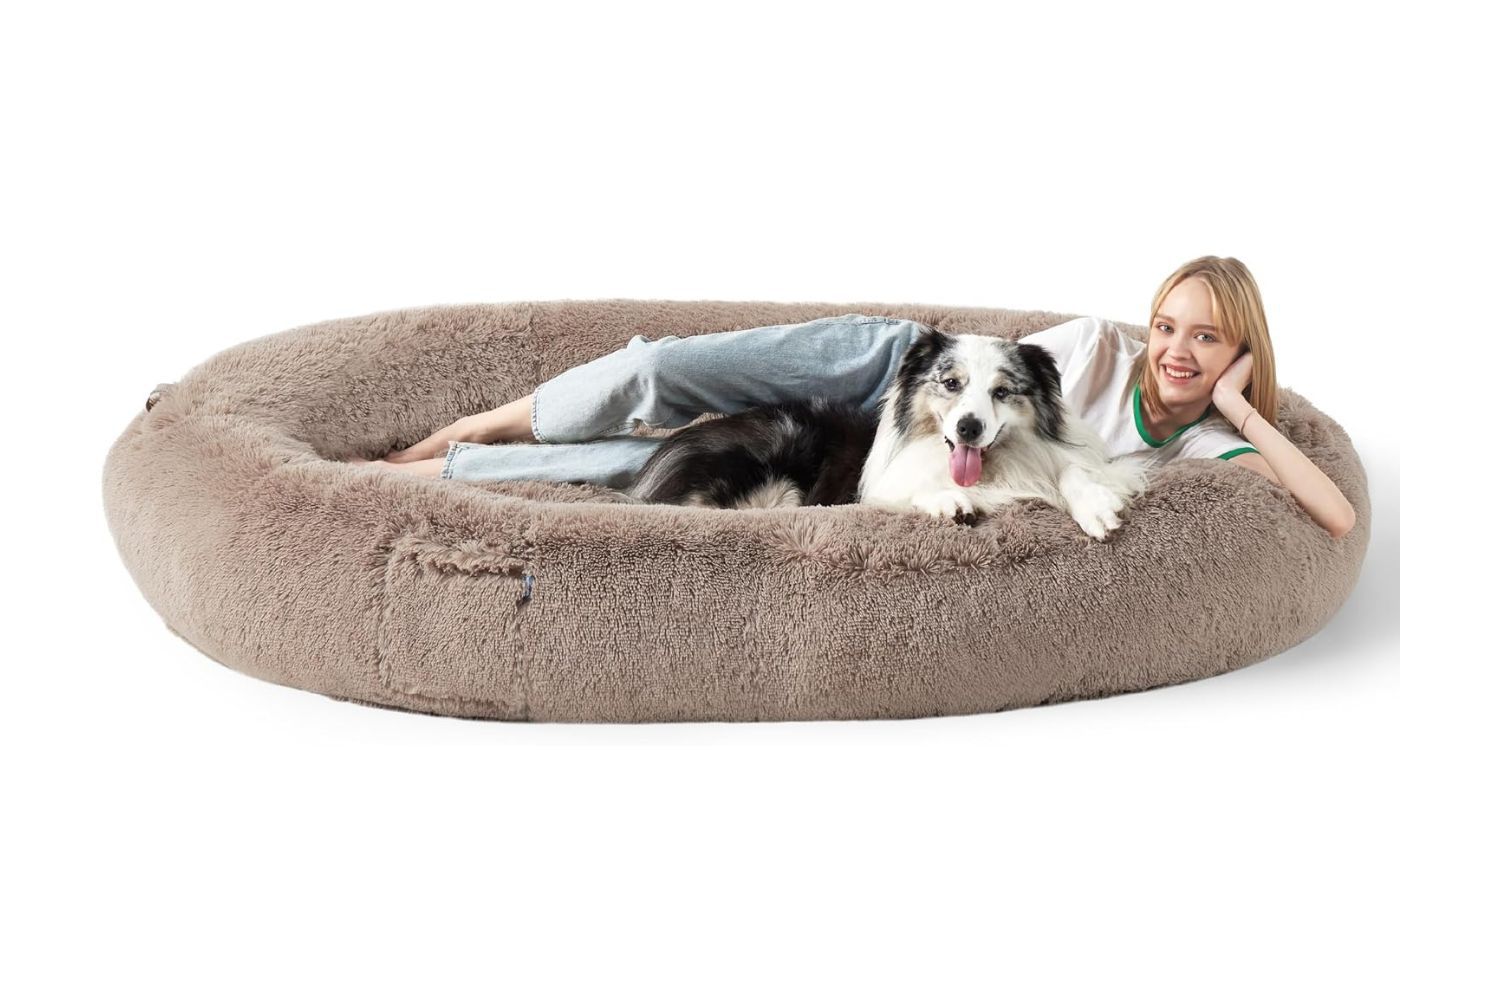 Bedsure Human Dog Bed for People Adults